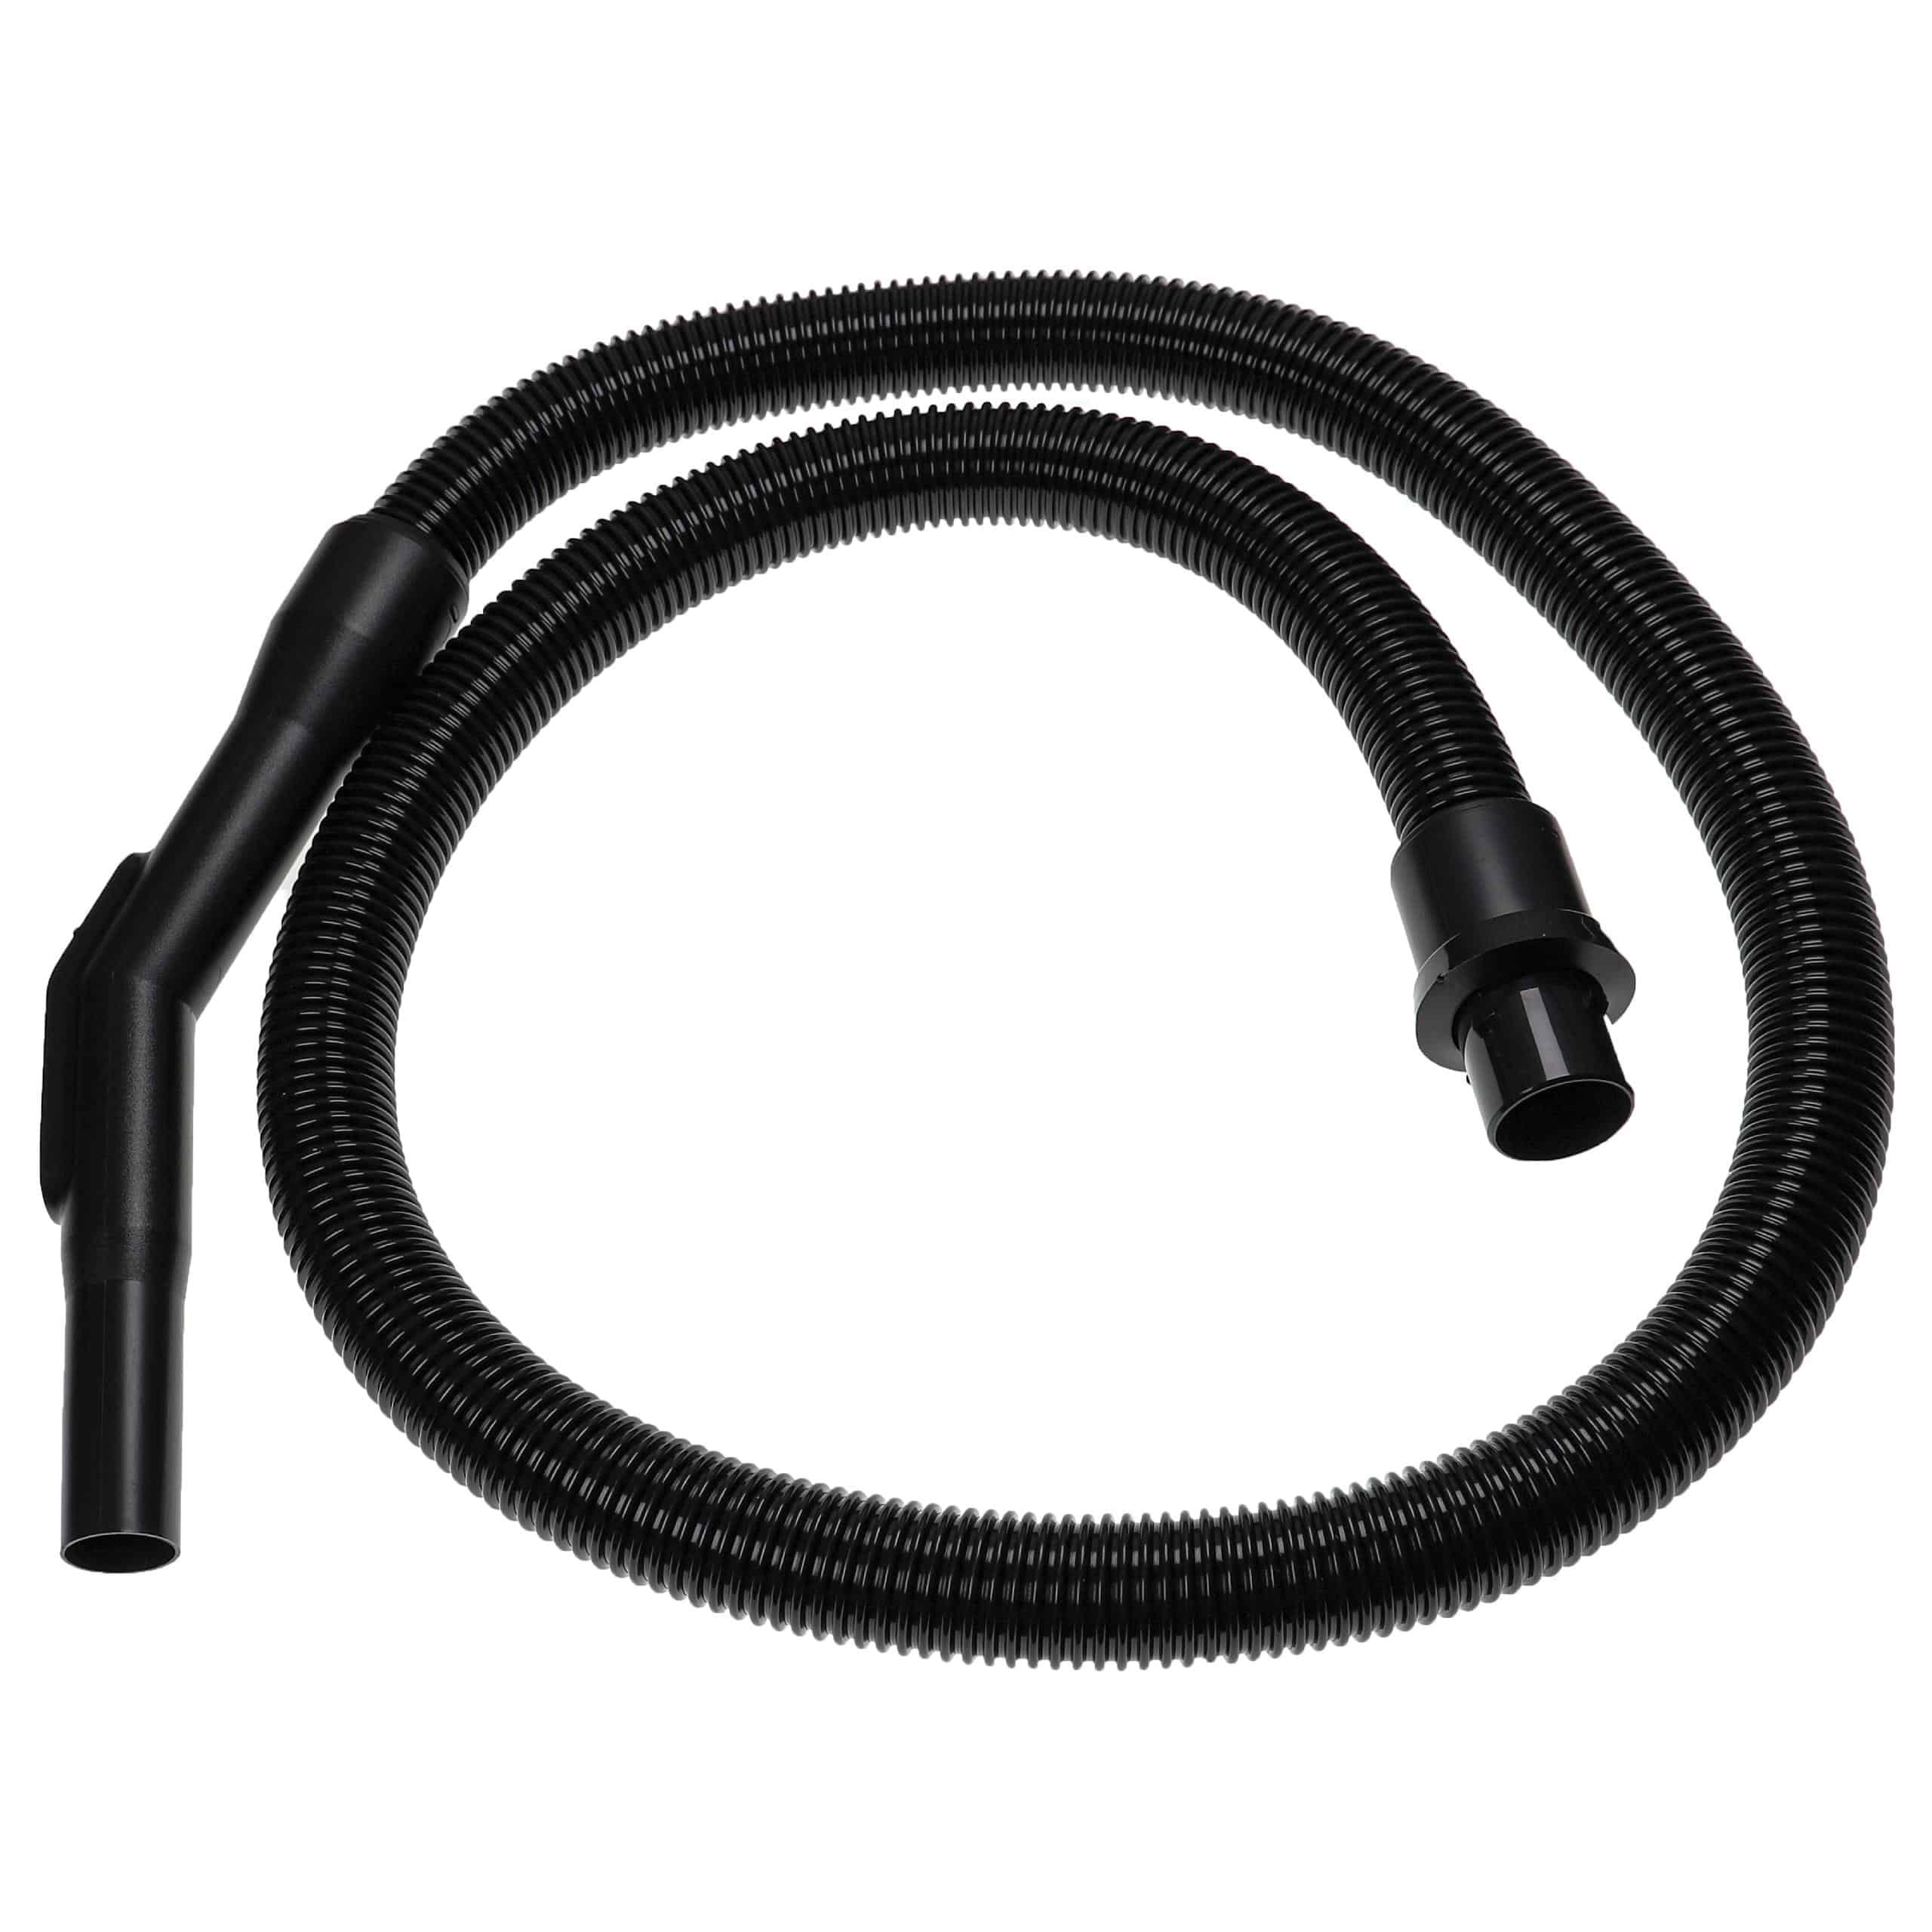 Hose as Replacement for Nilfisk 12018001 - with Handle, 1.8 m long